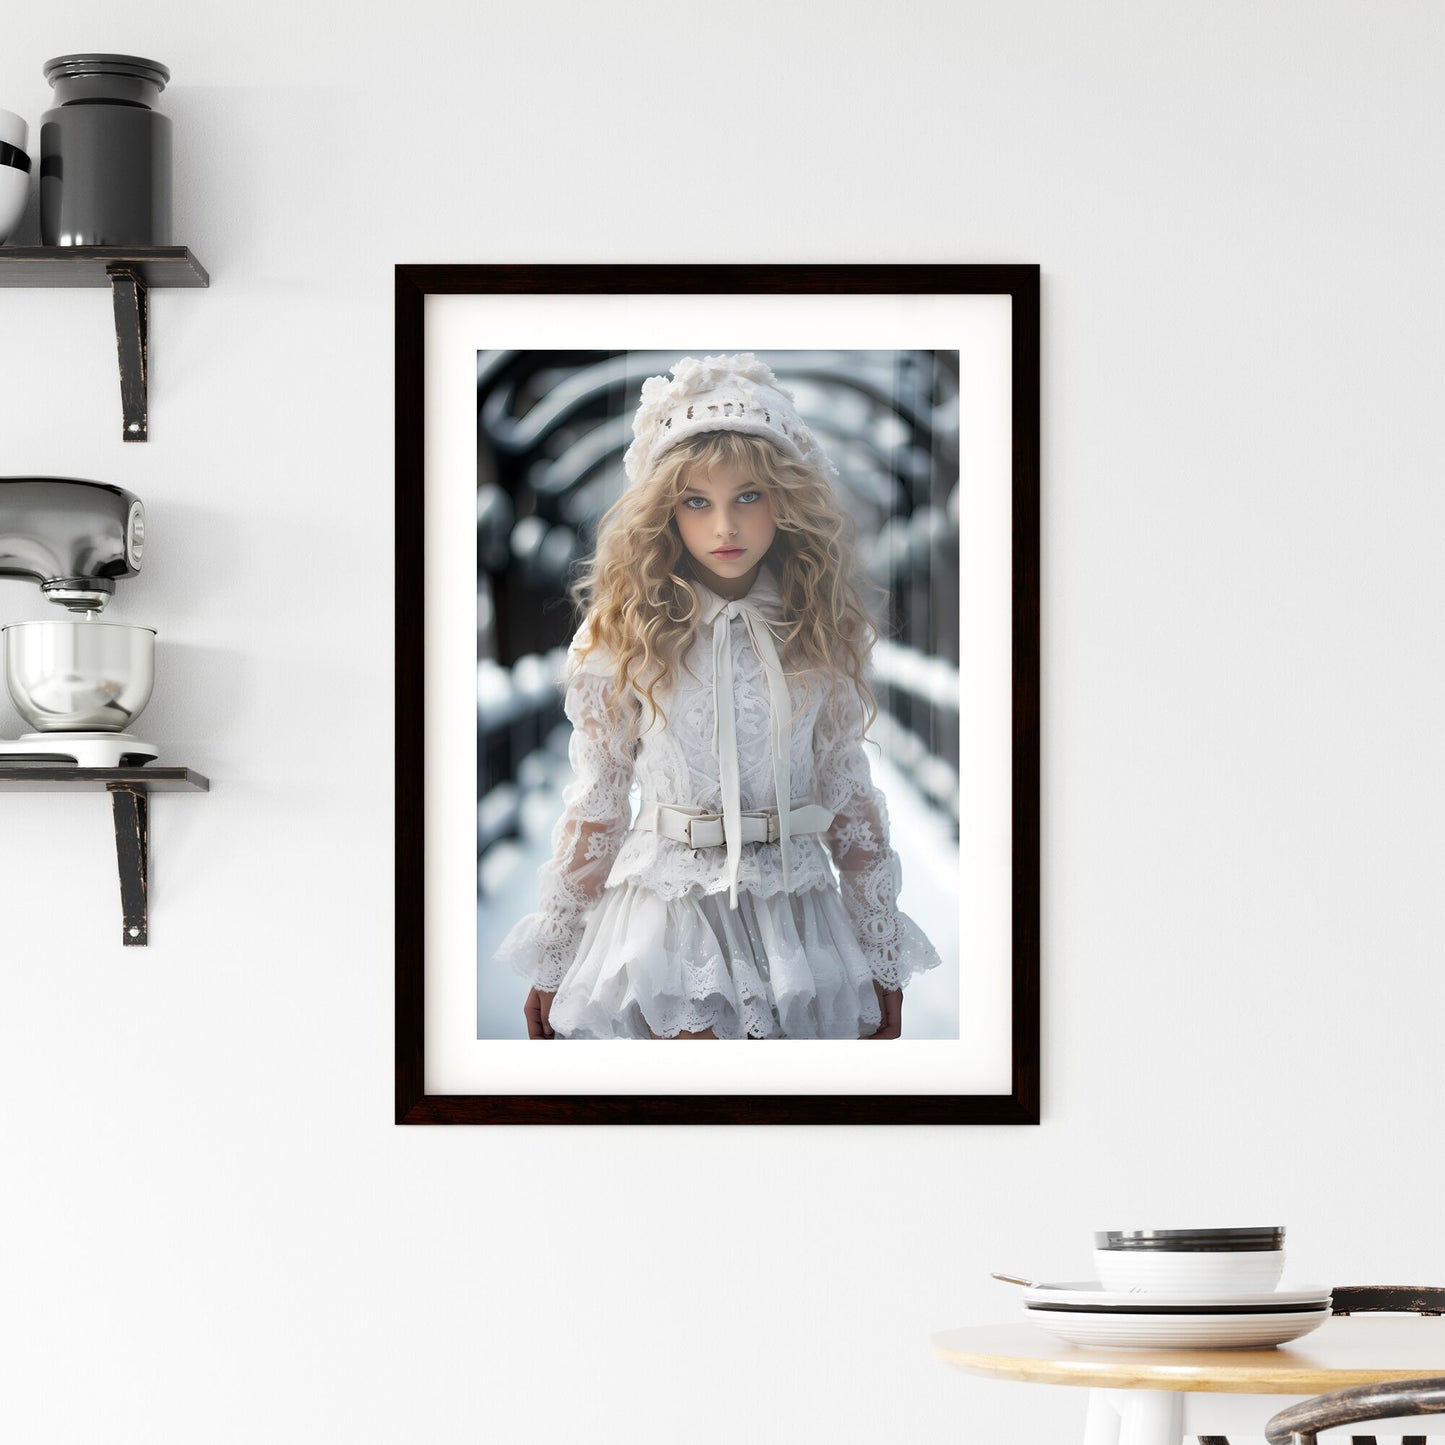 A Poster of In the cold season of snowflakes - A Girl In A White Dress Default Title